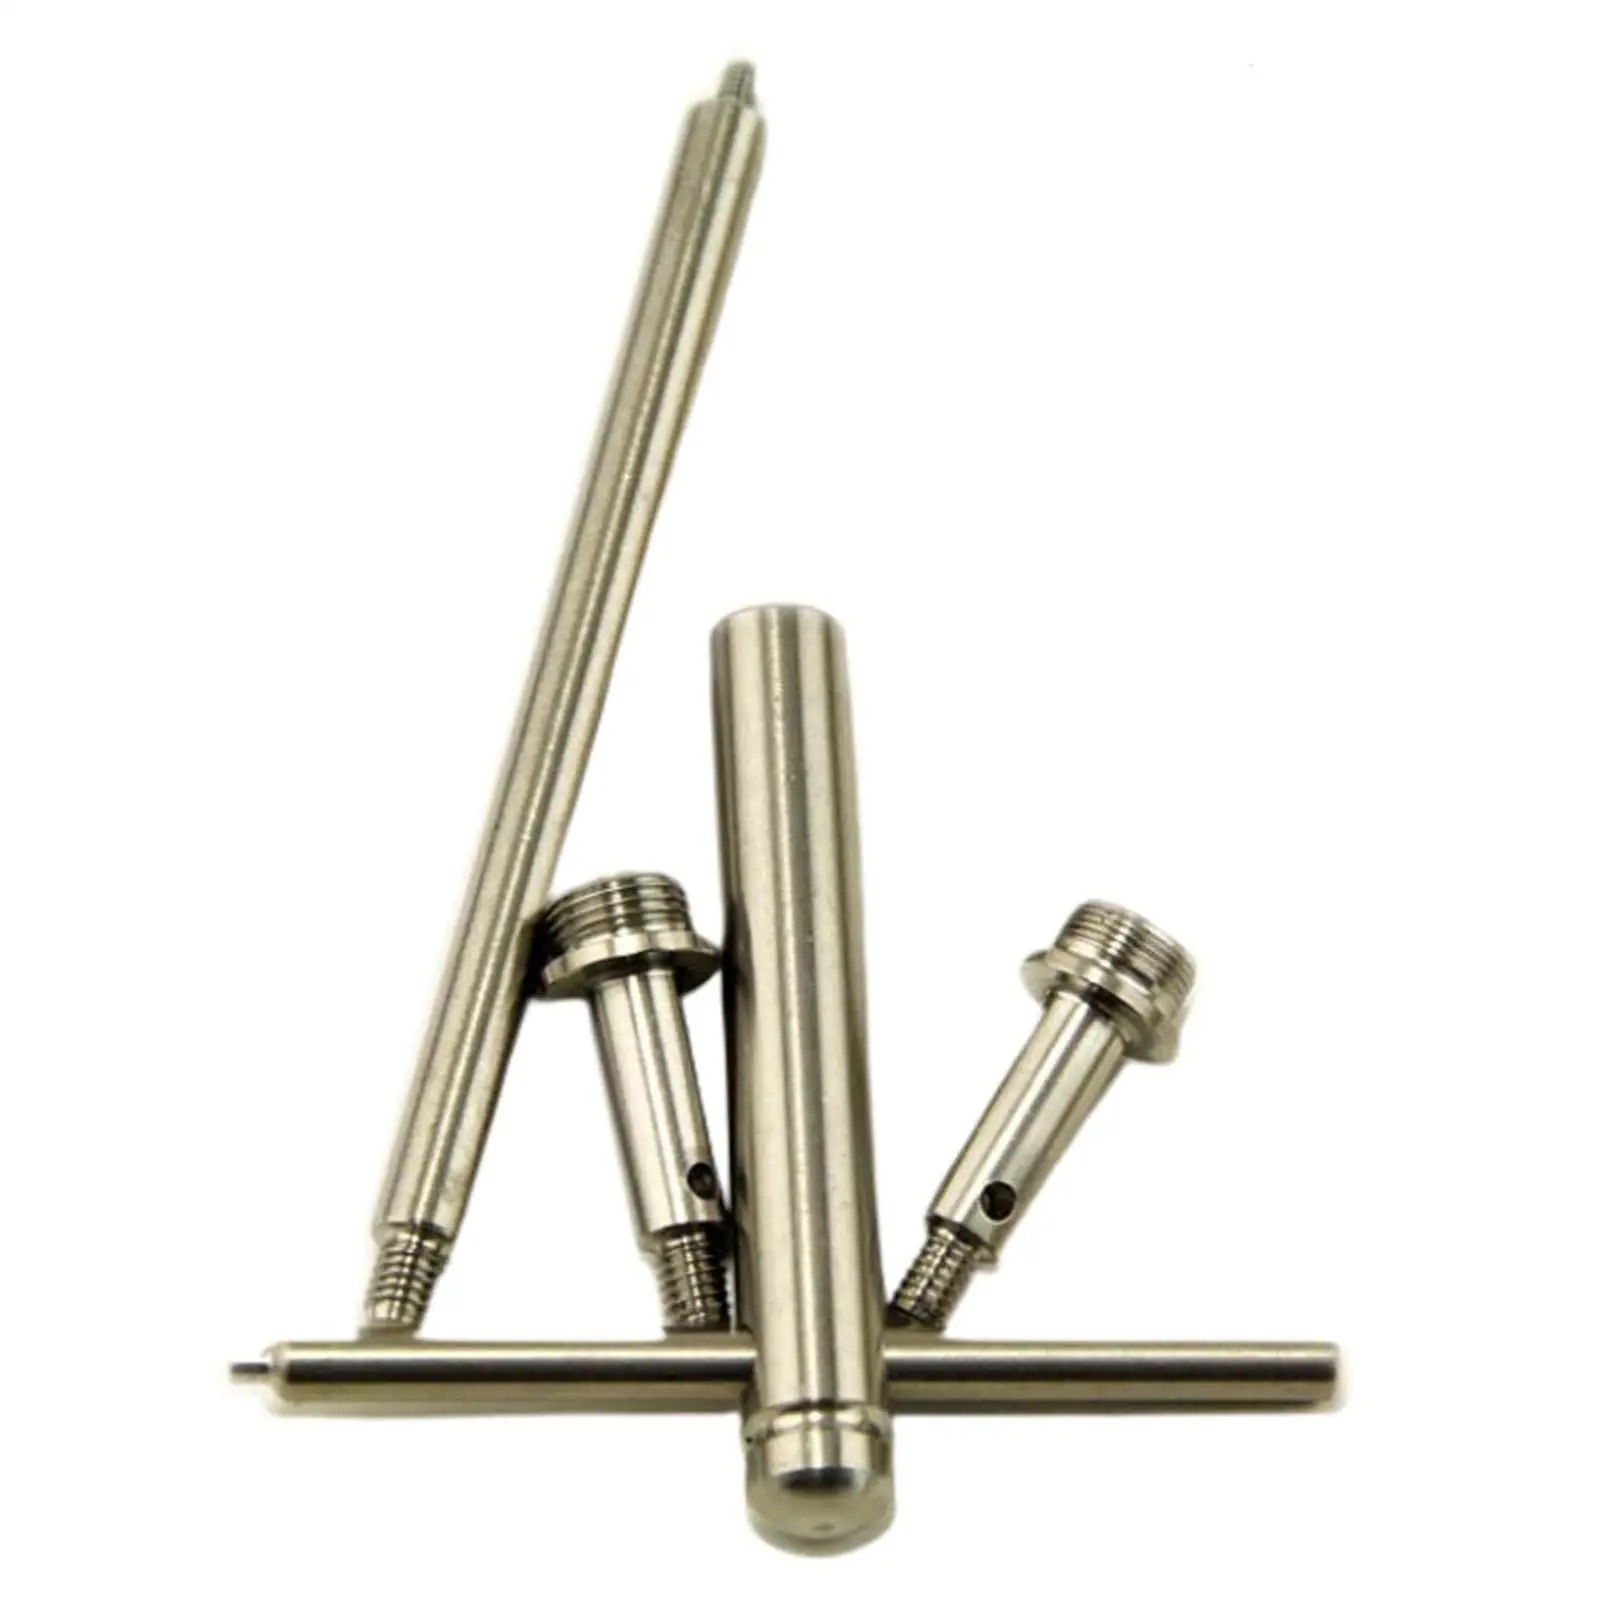 Trumpet Piston Grinding Auxiliary Tools Steel Connecting Piston for Trumpet Brass Parts Vertical Key Copper Wind Instruments